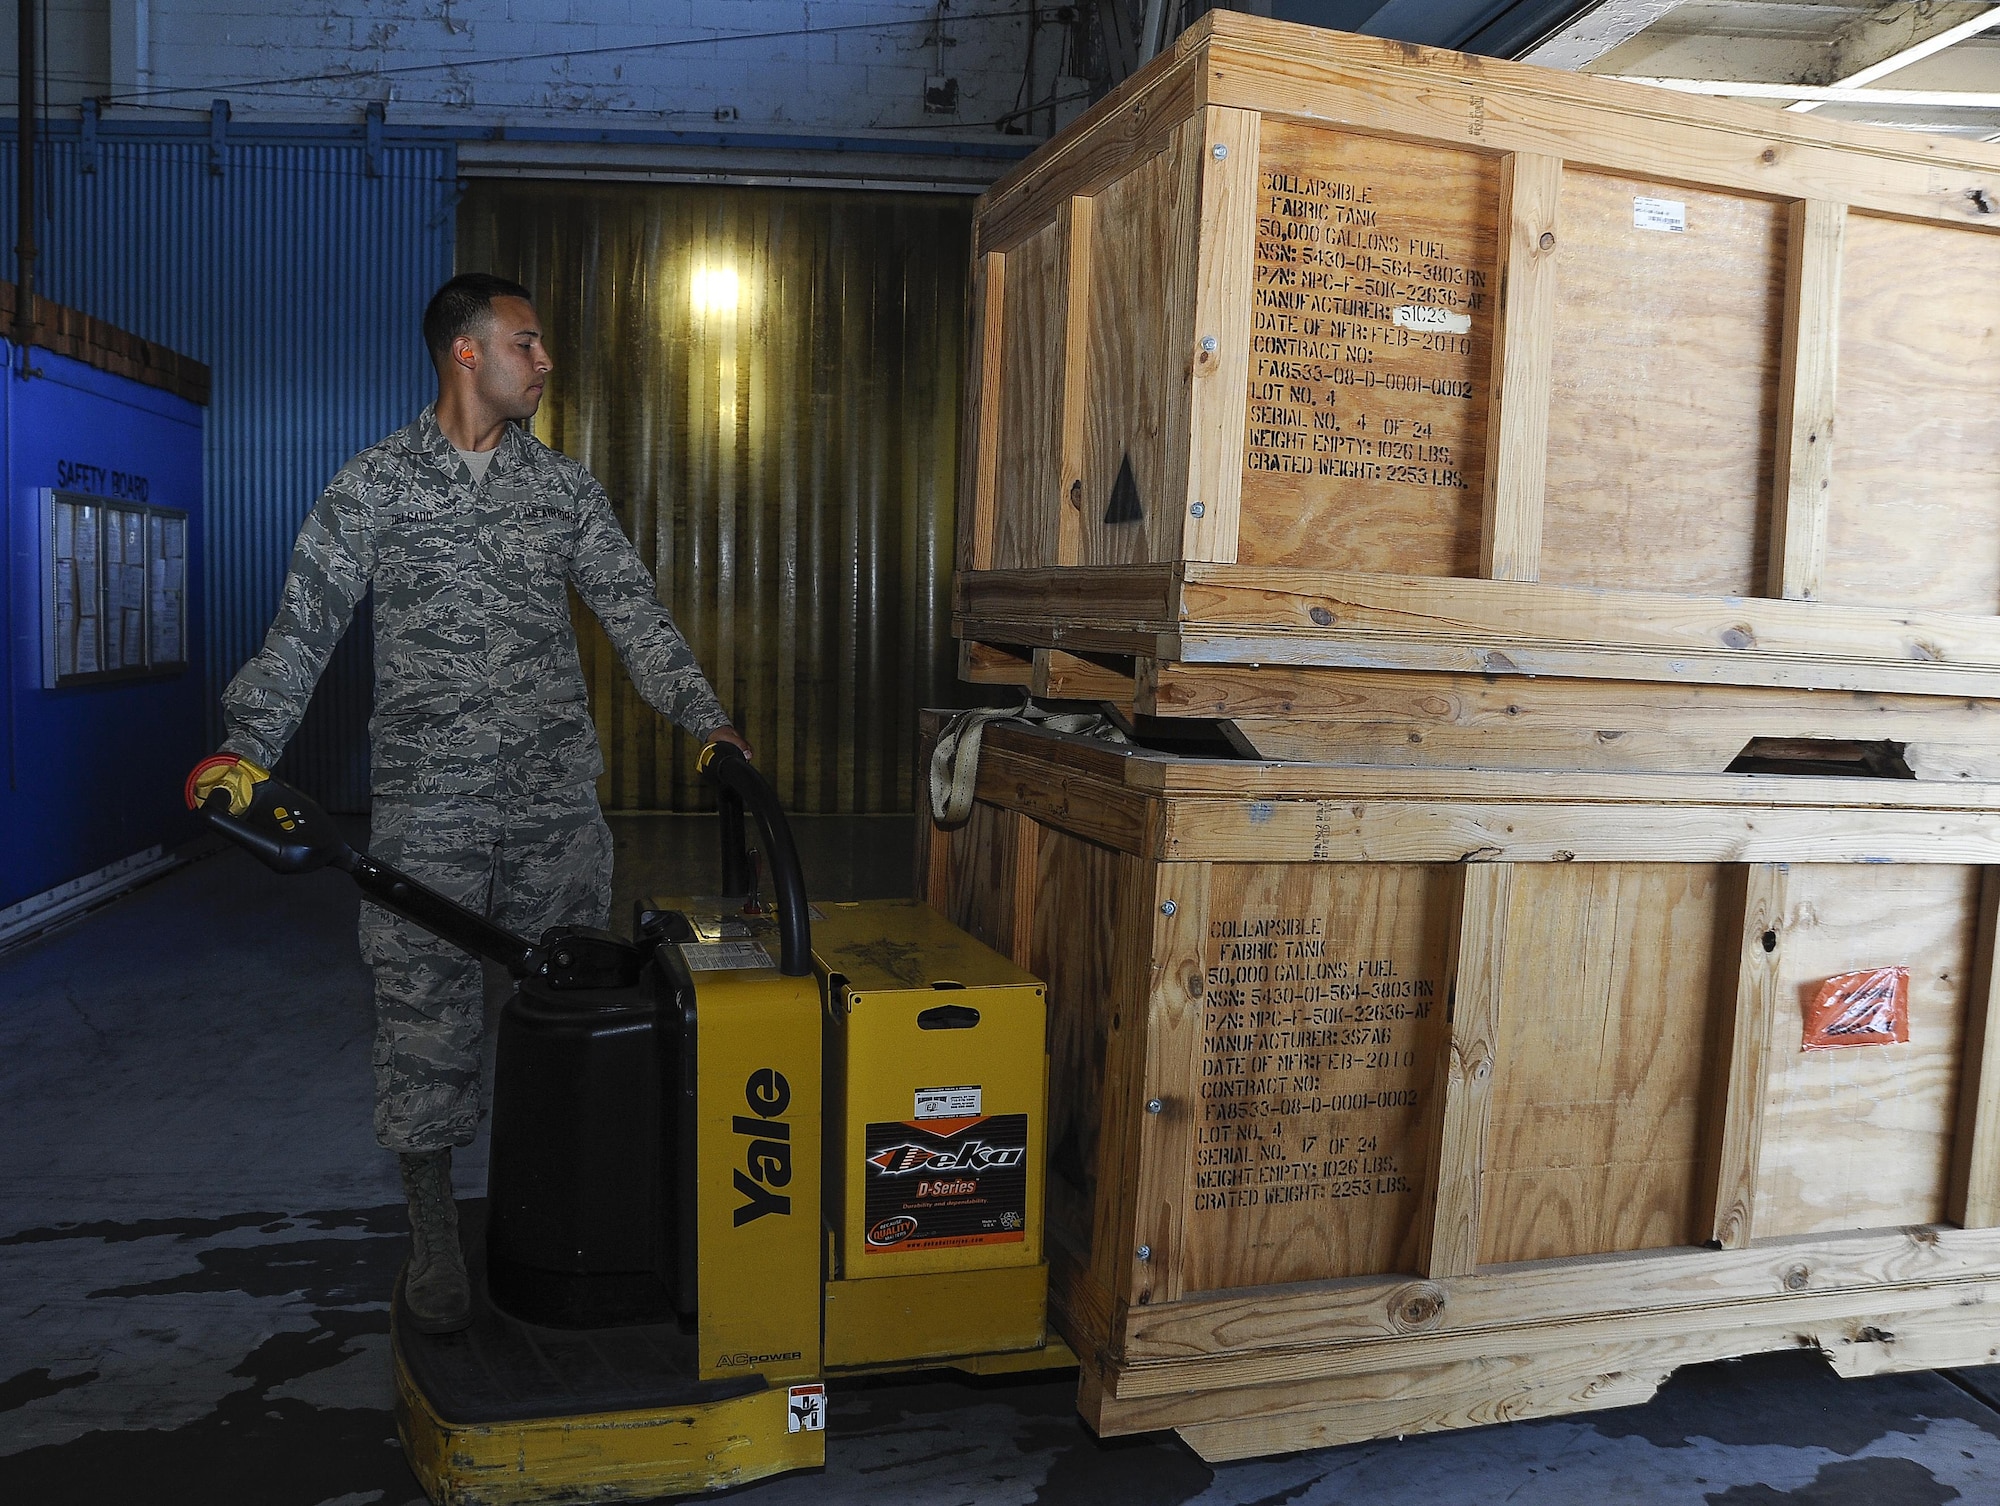 Senior Airman Fabian Delgado, a traffic management journeyman with the 6th Logistics Readiness Squadron, transfers crates on MacDill Air Force Base, Fla., April 19, 2016. The crates contain war reserve materiel, which is prepositioned in reserve for times of need. Since the 49th Materiel Maintenance Support Squadron’s Operating Location Alpha moved from MacDill AFB to Holloman AFB, N.M., in 2015, excess materiel has been transported throughout the world. (U.S. Air Force photo/Airman 1st Class Mariette Adams) 